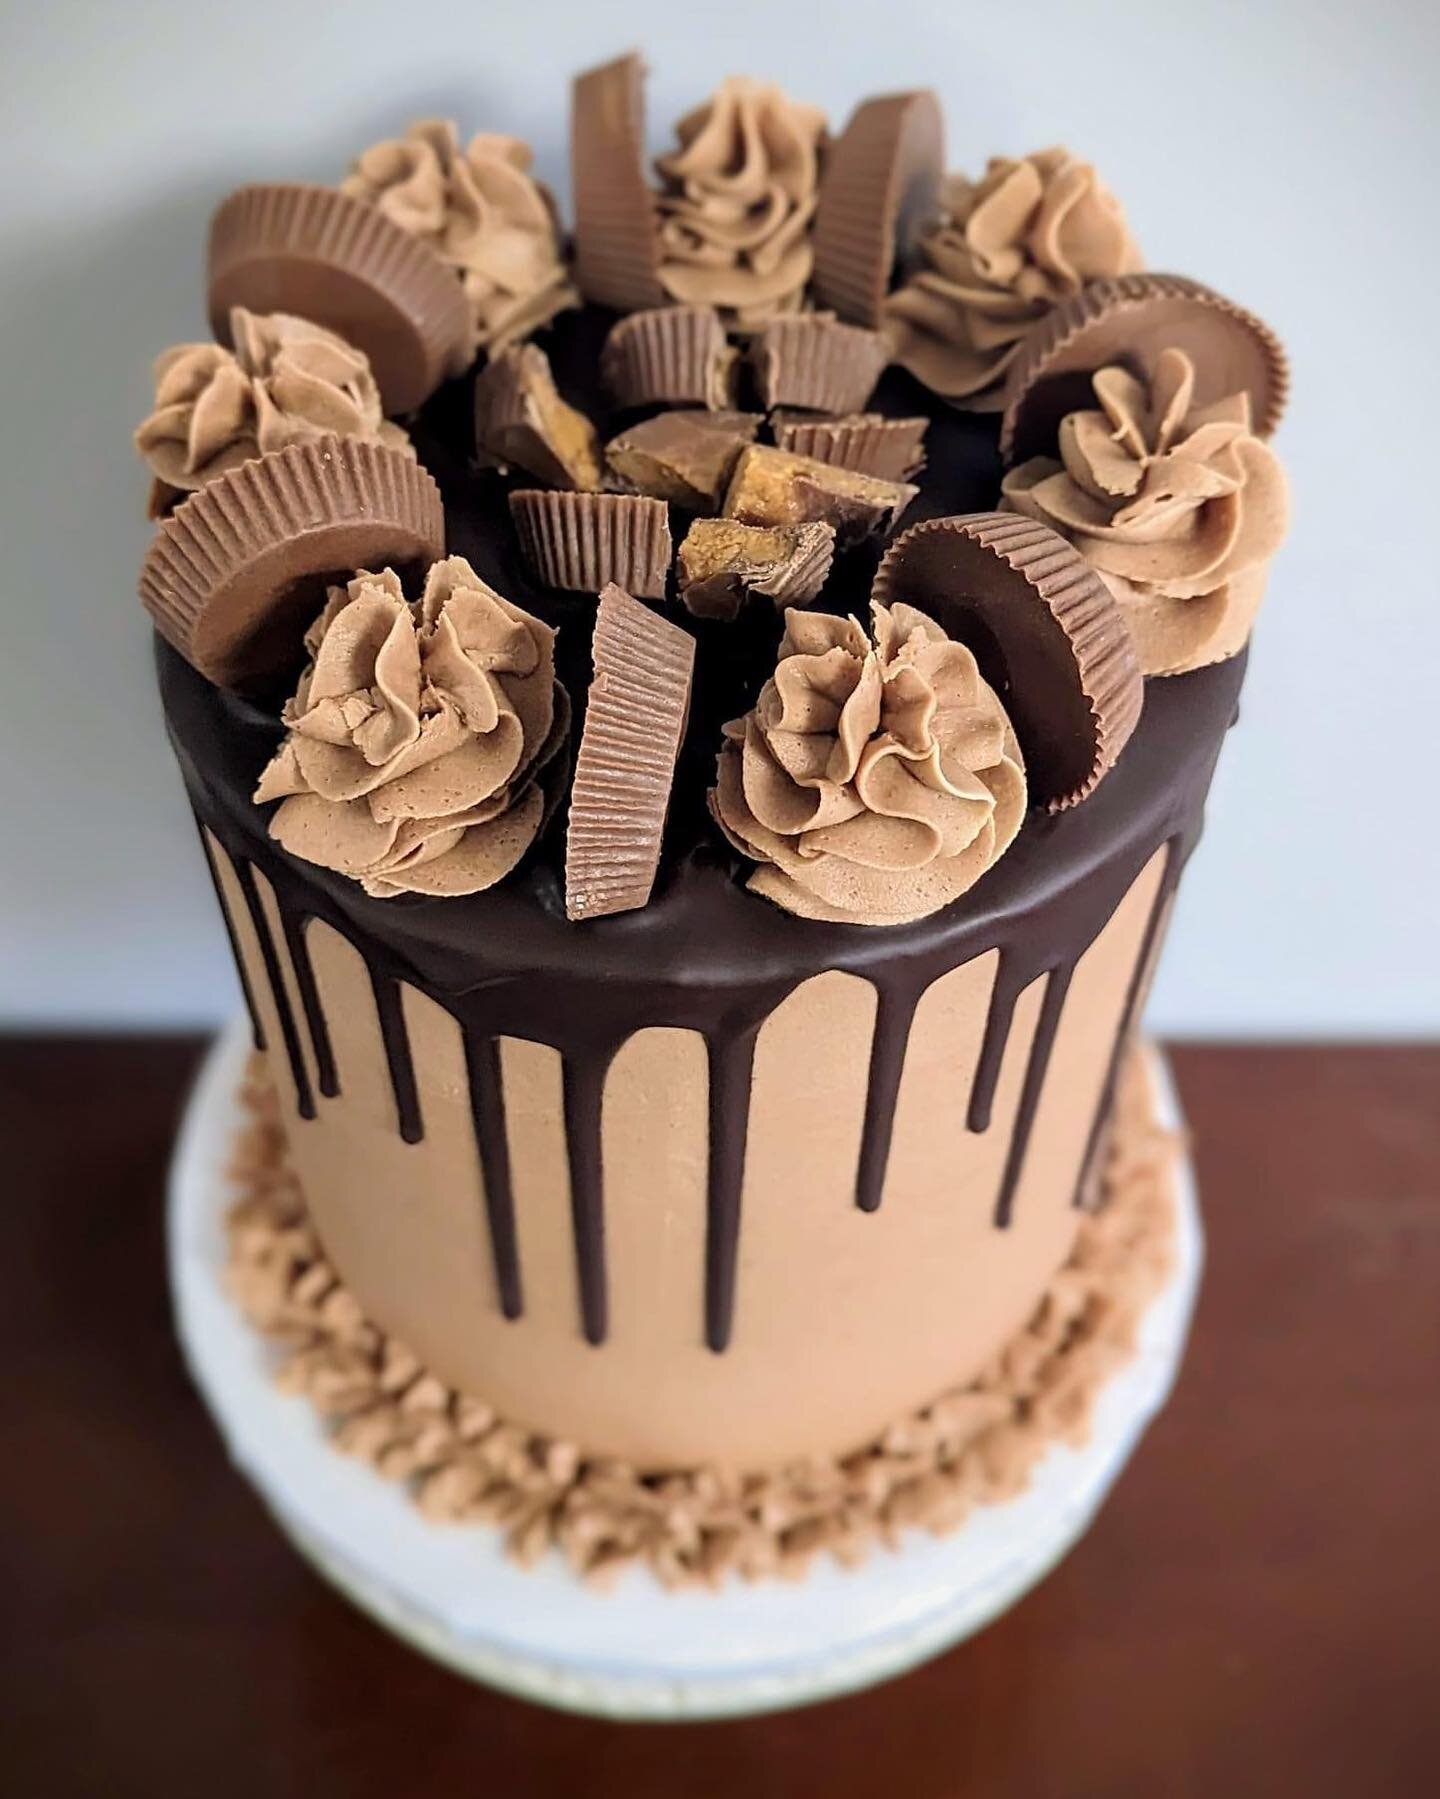 Chocolate cake with peanut butter frosting, a dark chocolate drip, and Reese peanut butter cups. YUM